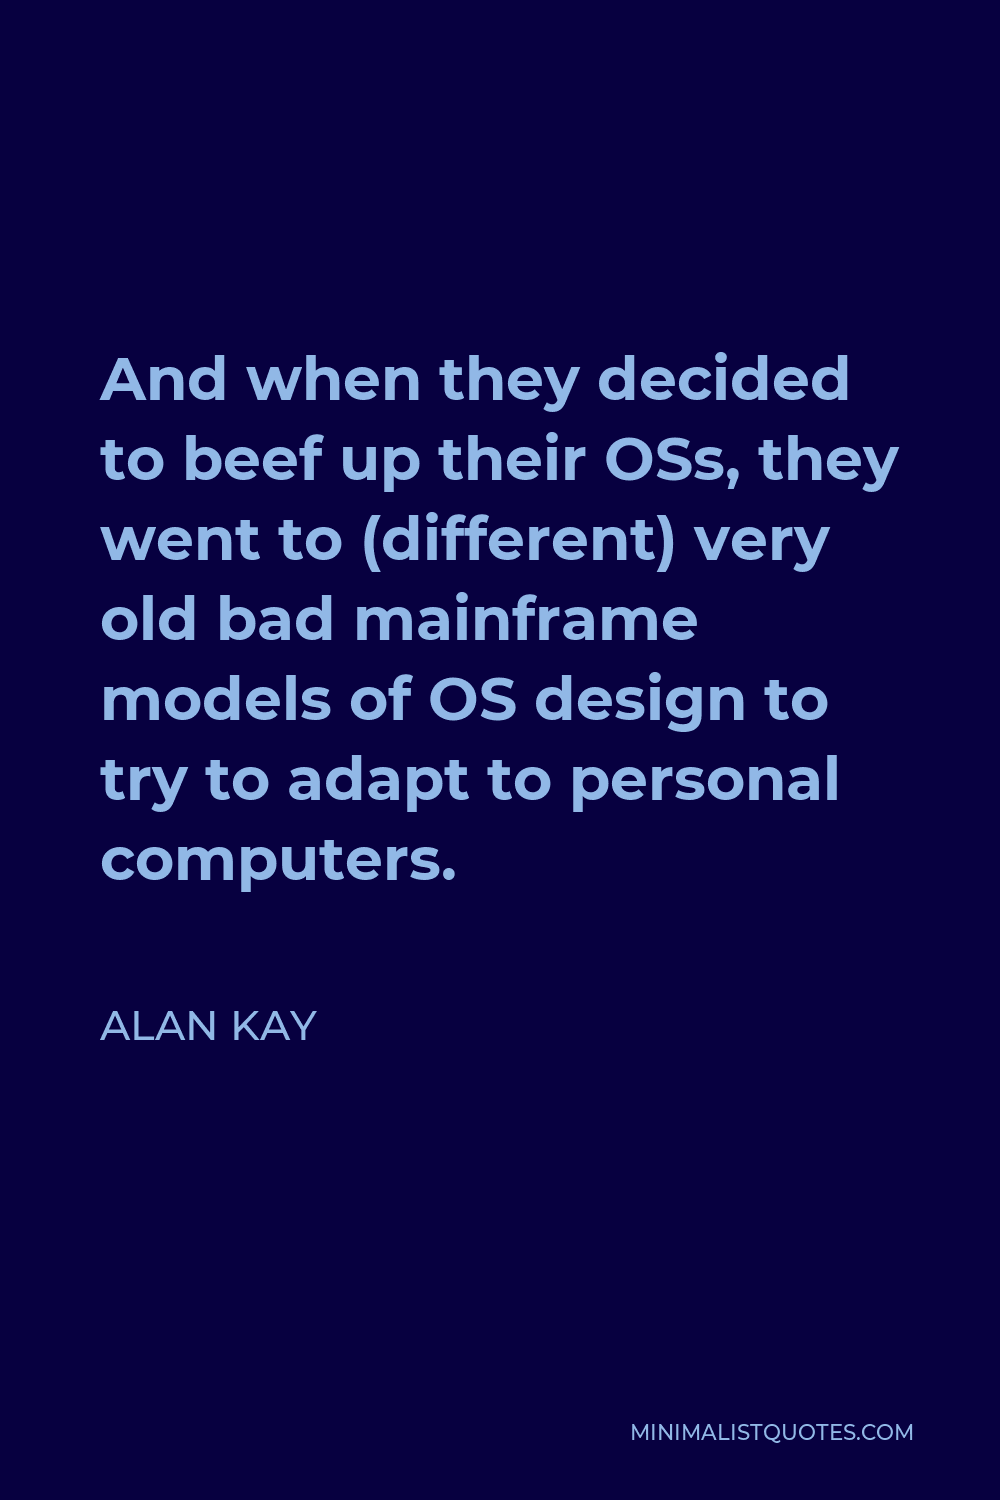 Alan Kay Quote - And when they decided to beef up their OSs, they went to (different) very old bad mainframe models of OS design to try to adapt to personal computers.